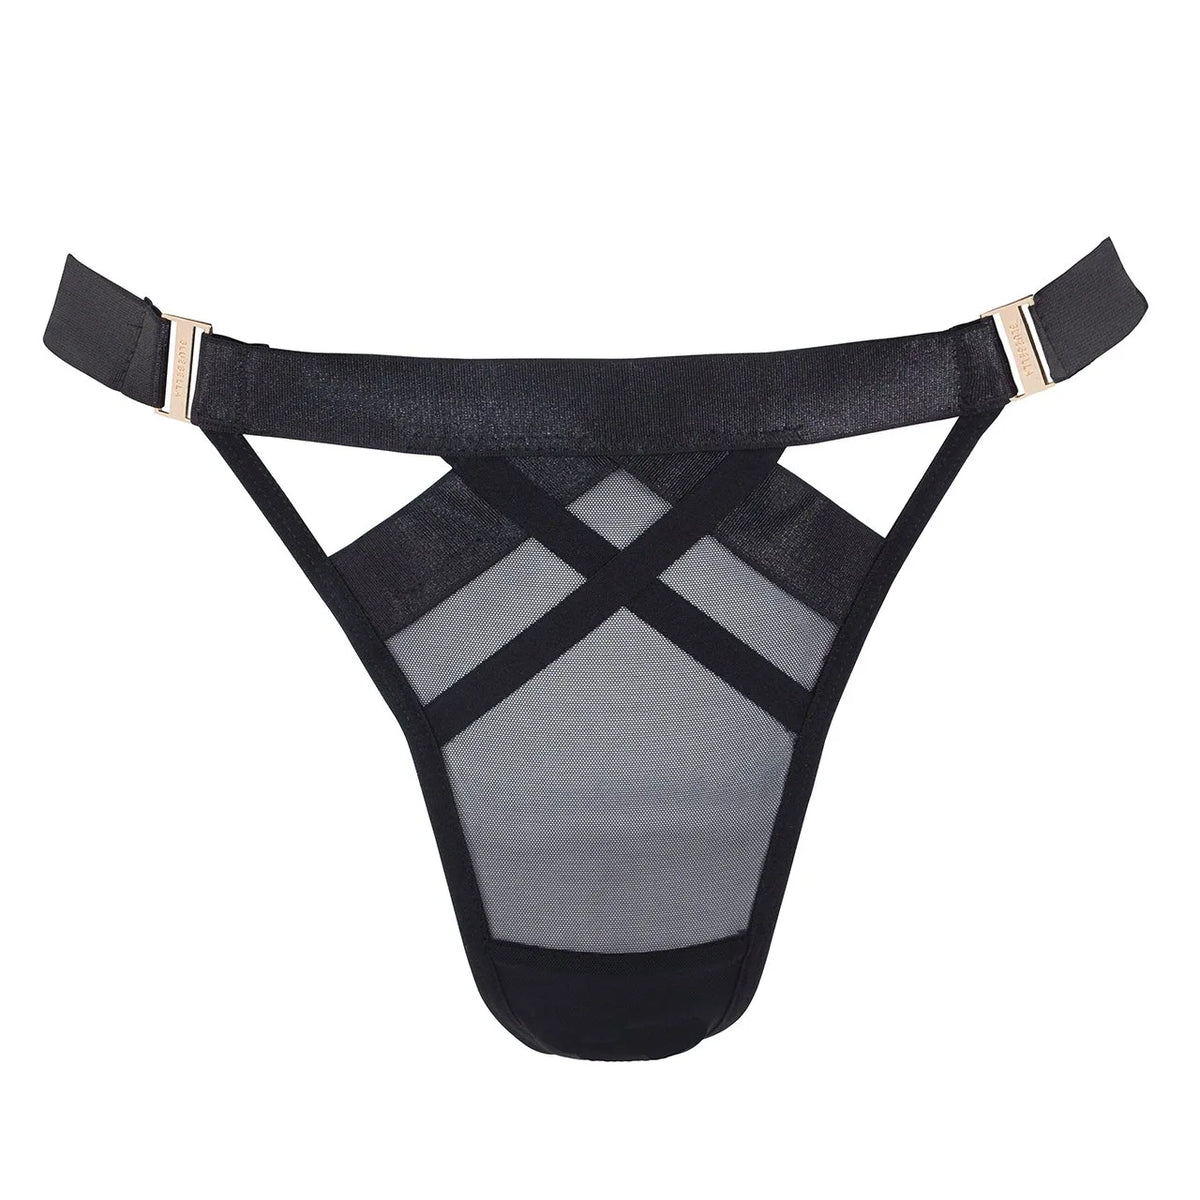 Sawyer Thong panty from Bluebella at Belle Lacet Lingerie.